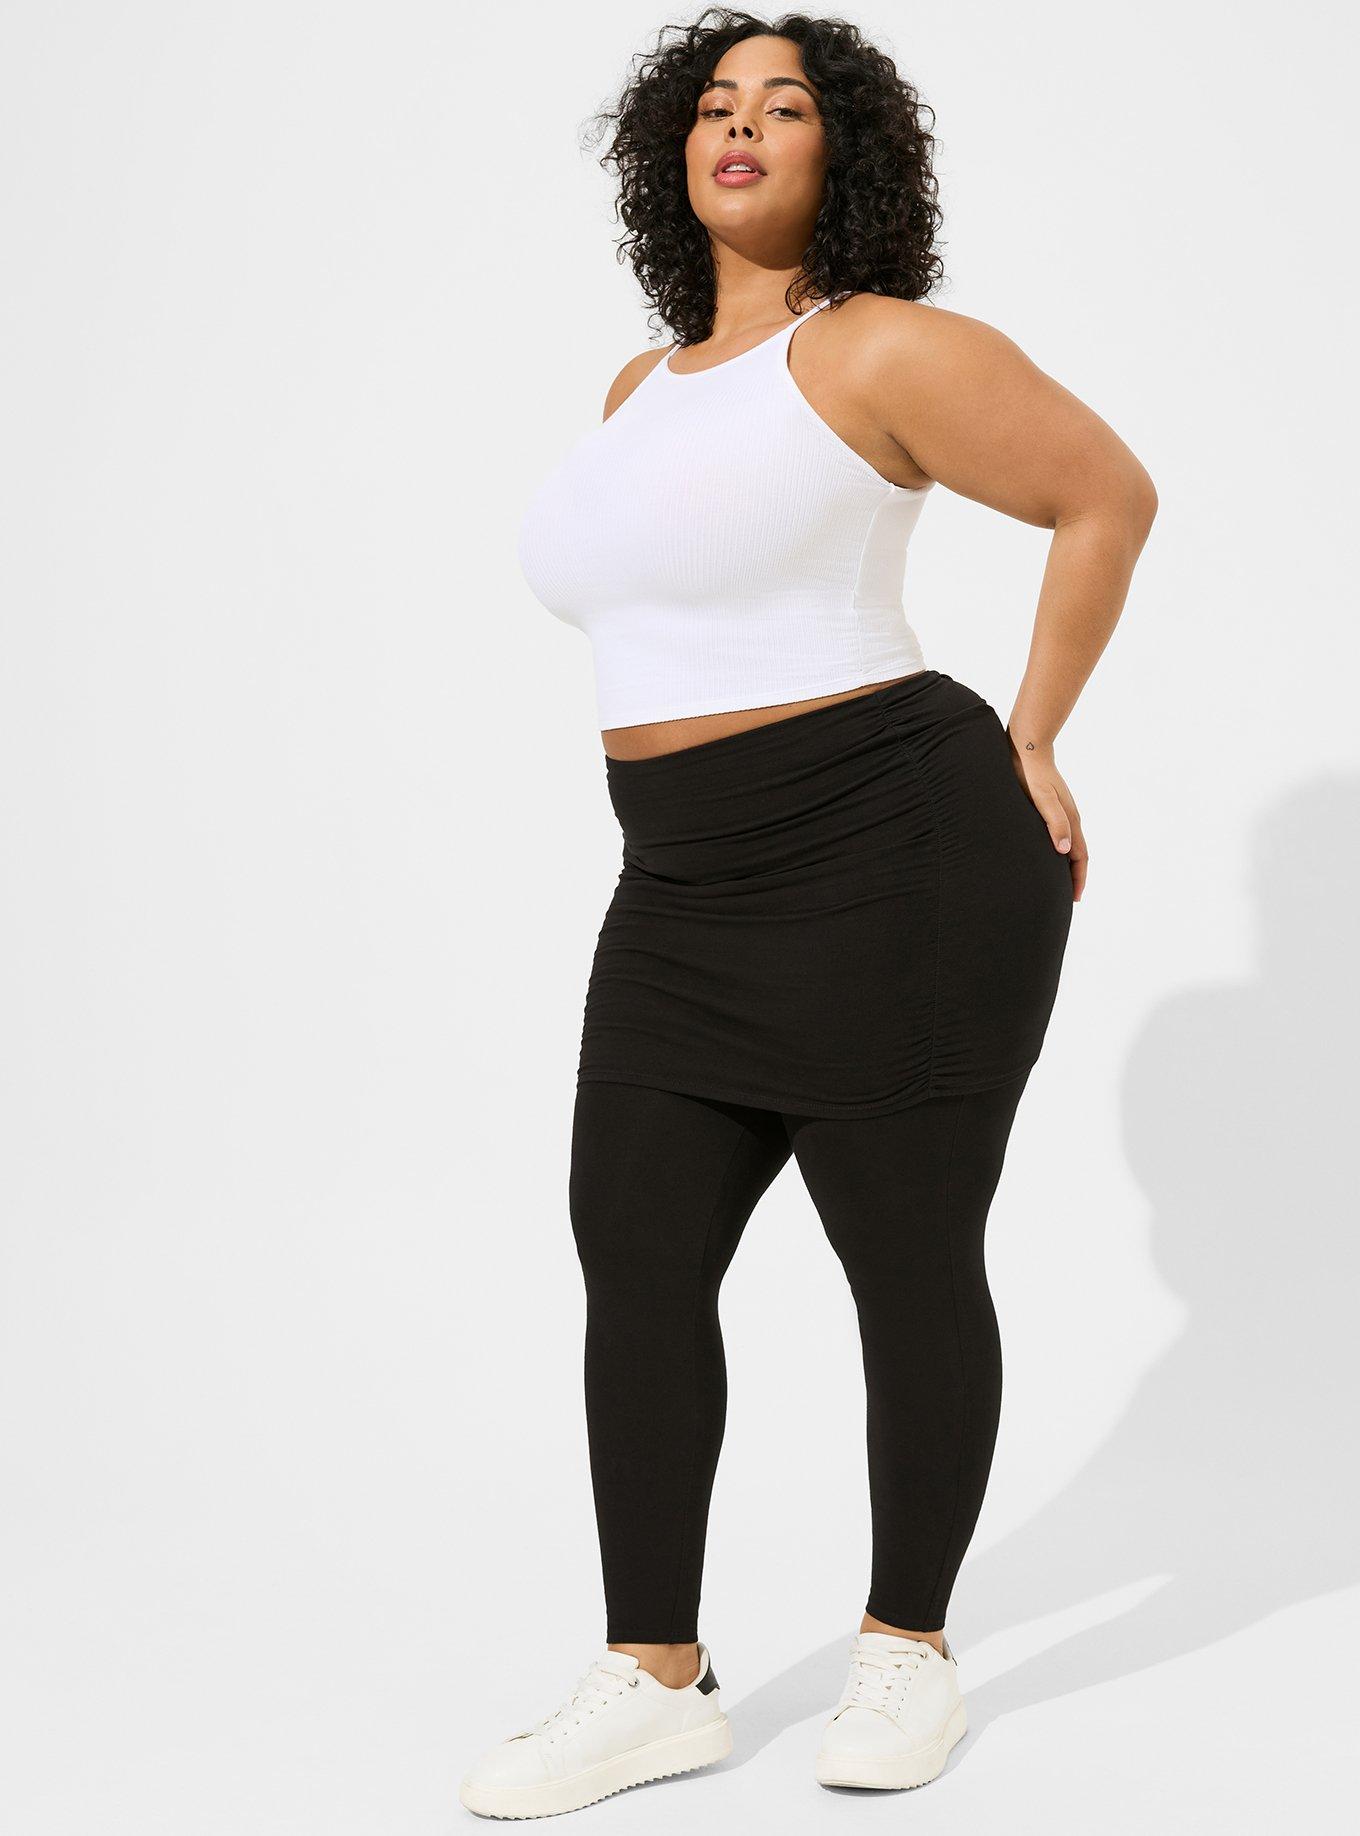 12 Plus Size Activewear 2-Piece Sets From Torrid